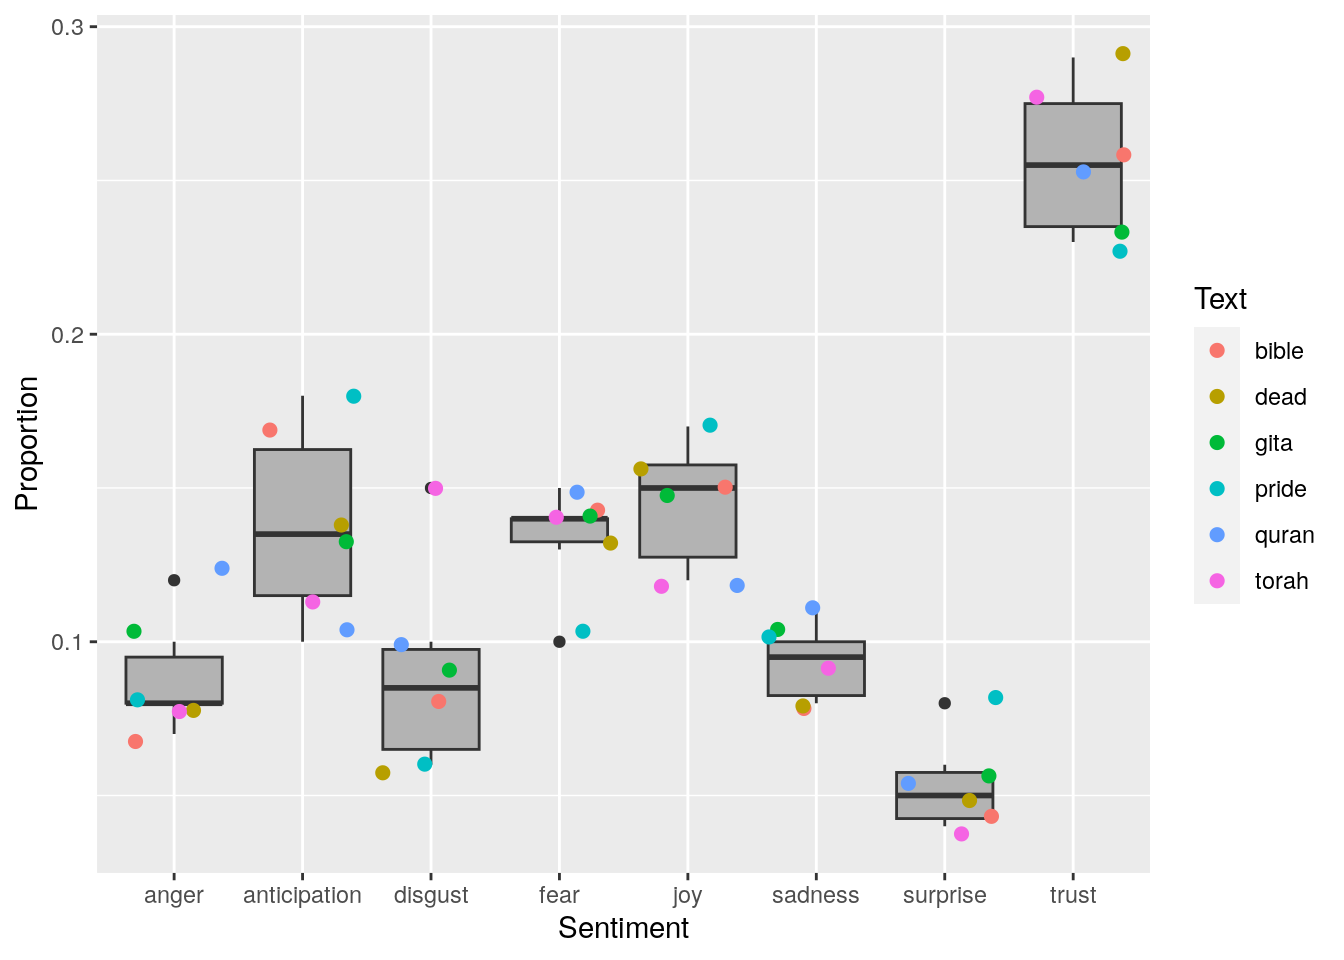 Boxplots of emotion for the texts. Individual scores shown as coloured points.